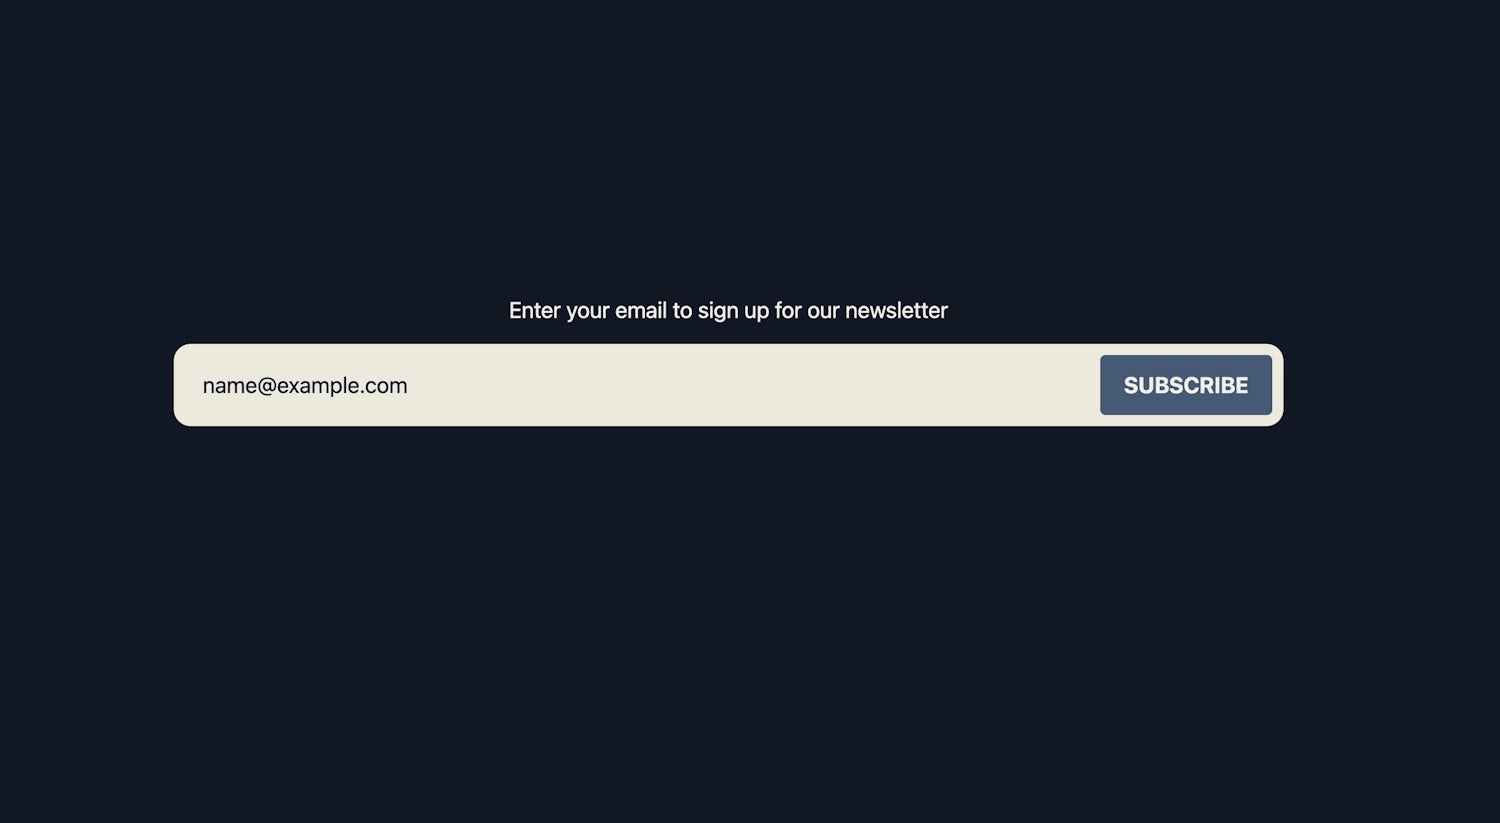 A 'subscribe' button appears to sit on top of an email input which has a placeholder value of 'name@example.com'. The form is labelled 'Enter your email to sign up for our newsletter'